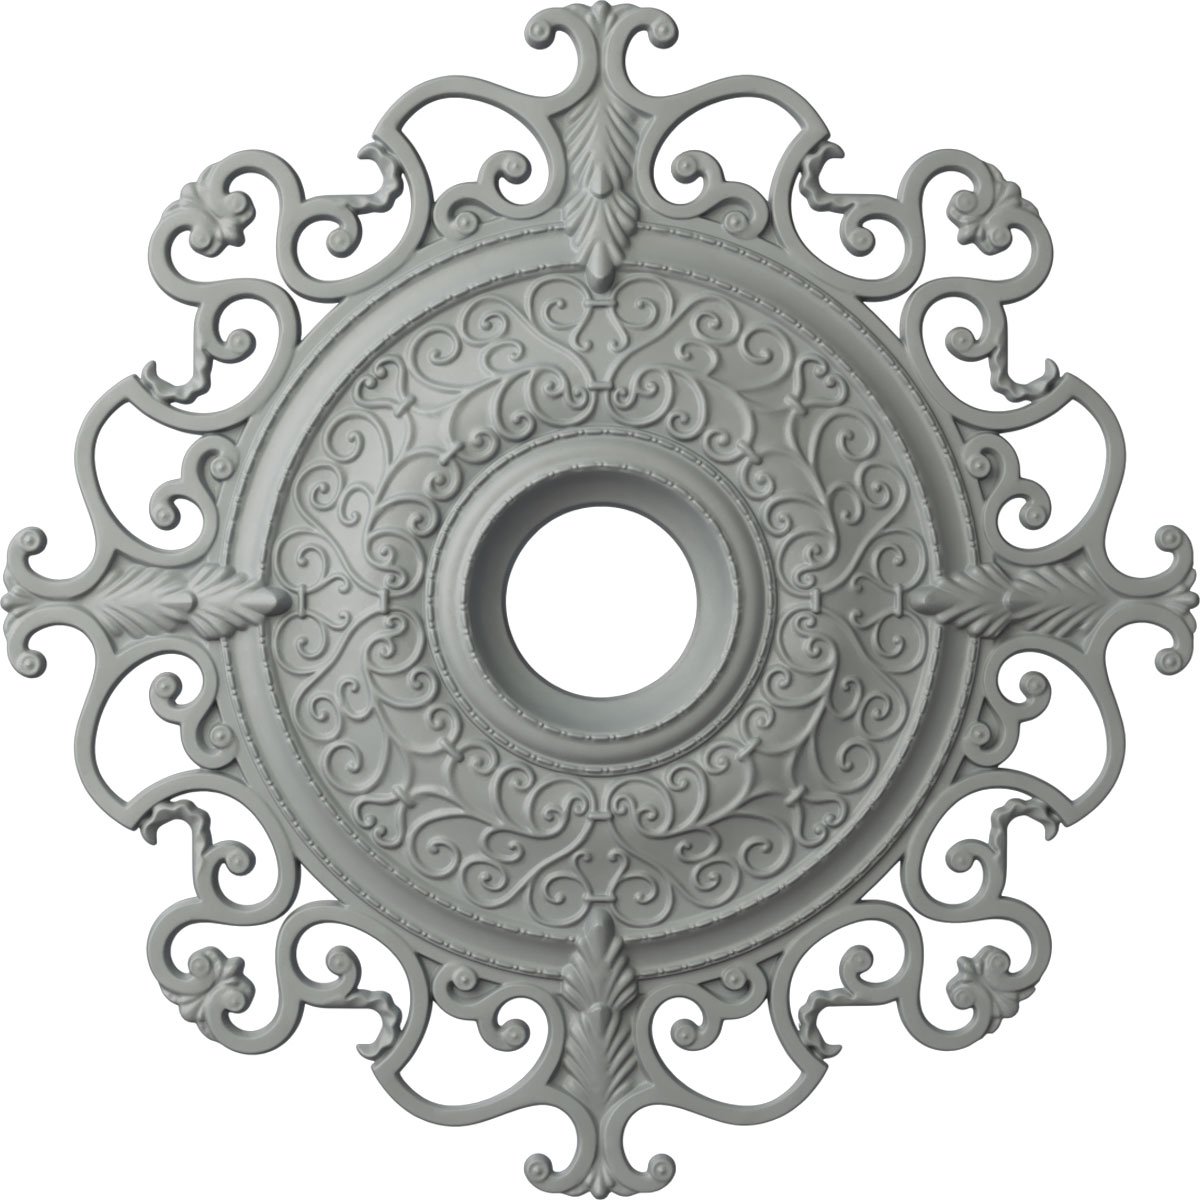 38 3/8-Inch OD x 6 5/8-Inch ID x 2 7/8-Inch P Orleans Ceiling Medallion  (Fits Canopies up to 8 1/4-Inch )